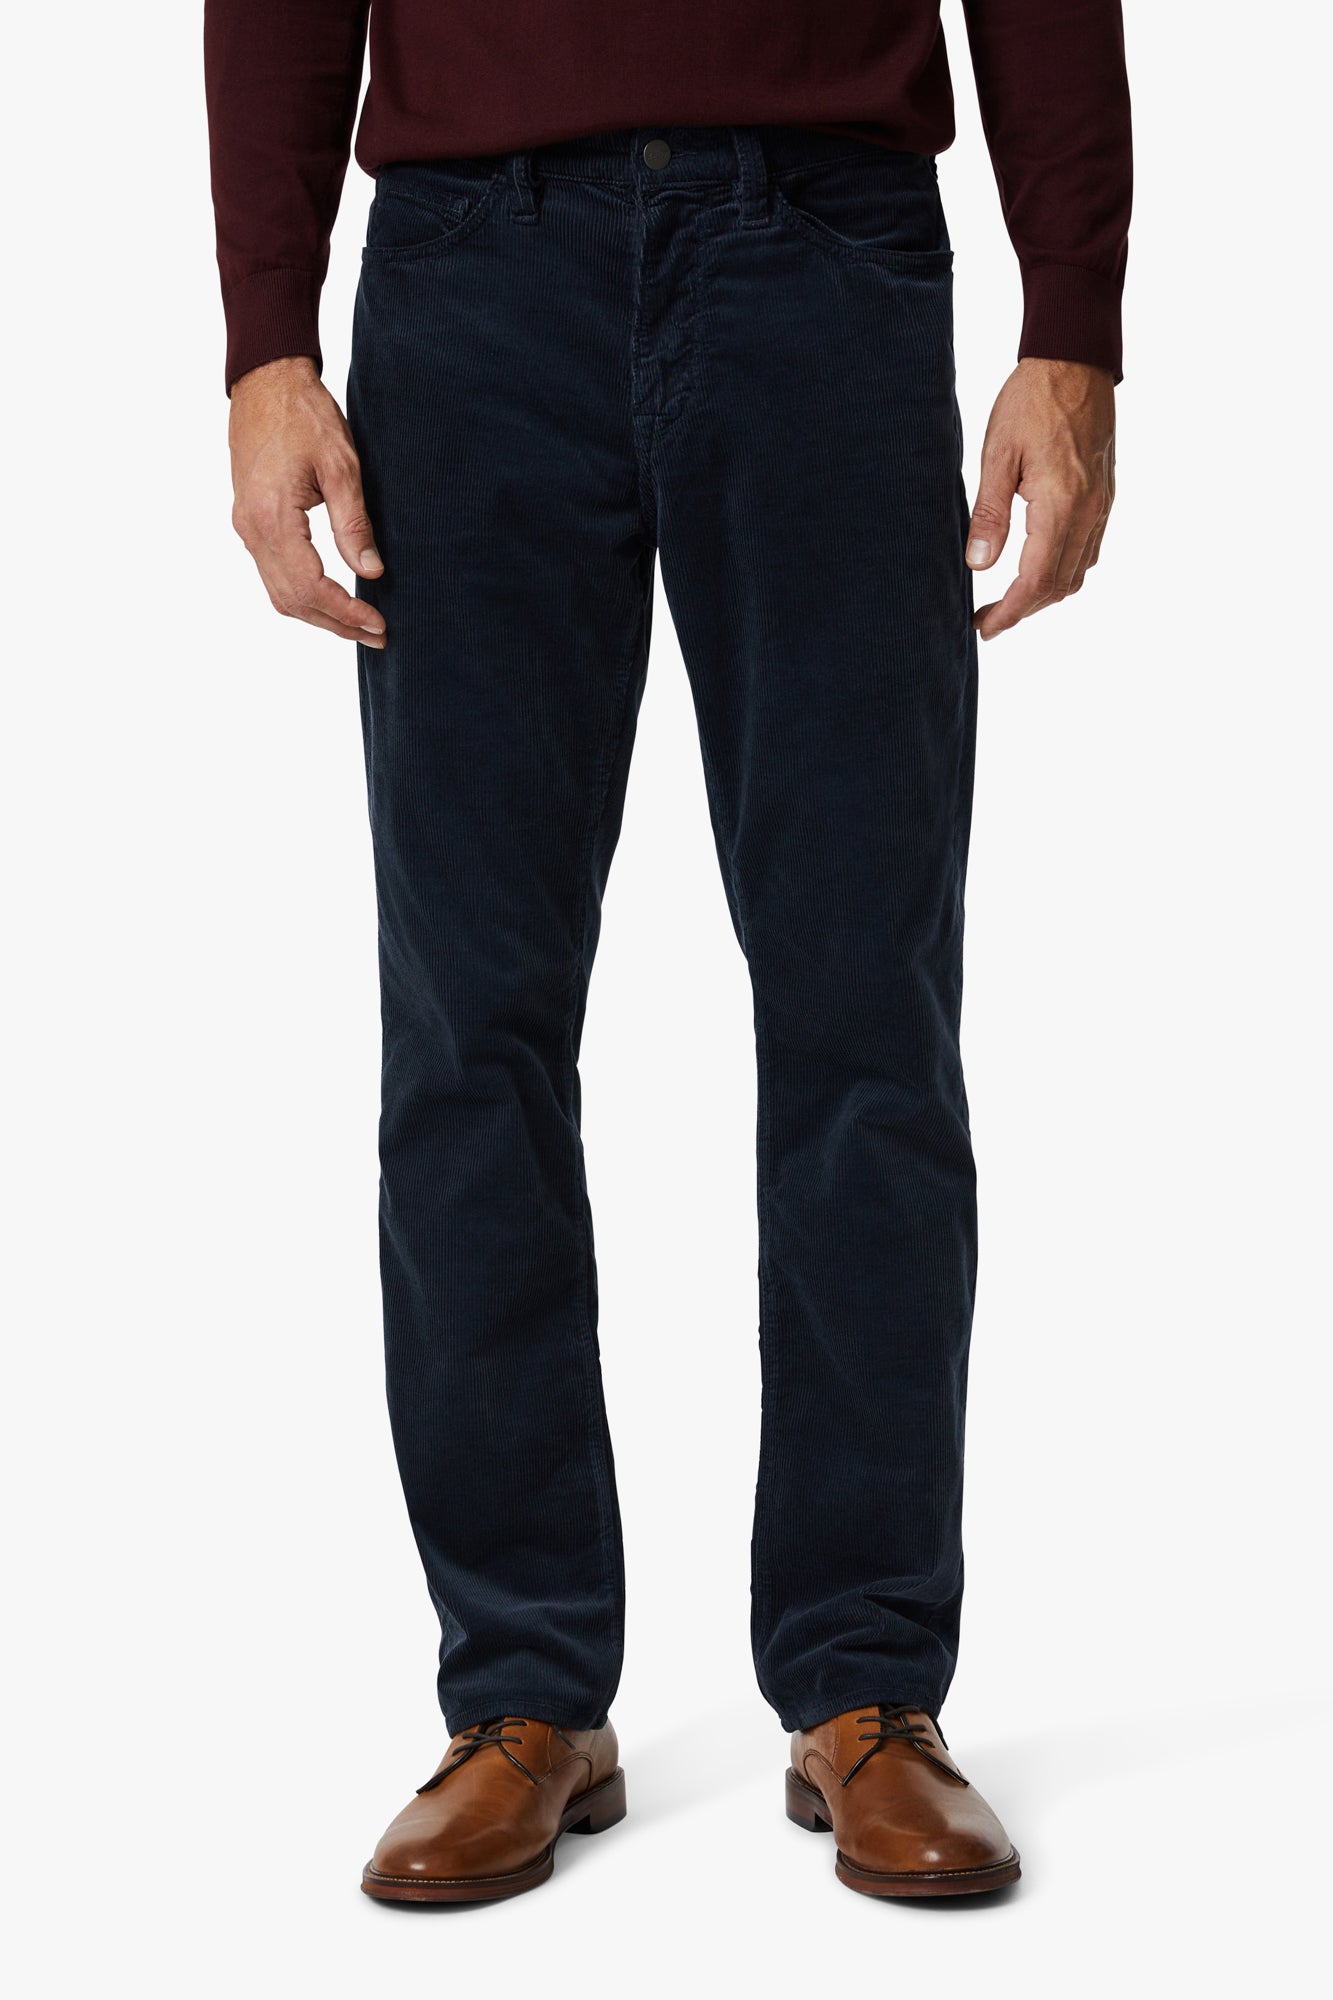 Charisma Relaxed Straight Pants In Navy Cord Image 3